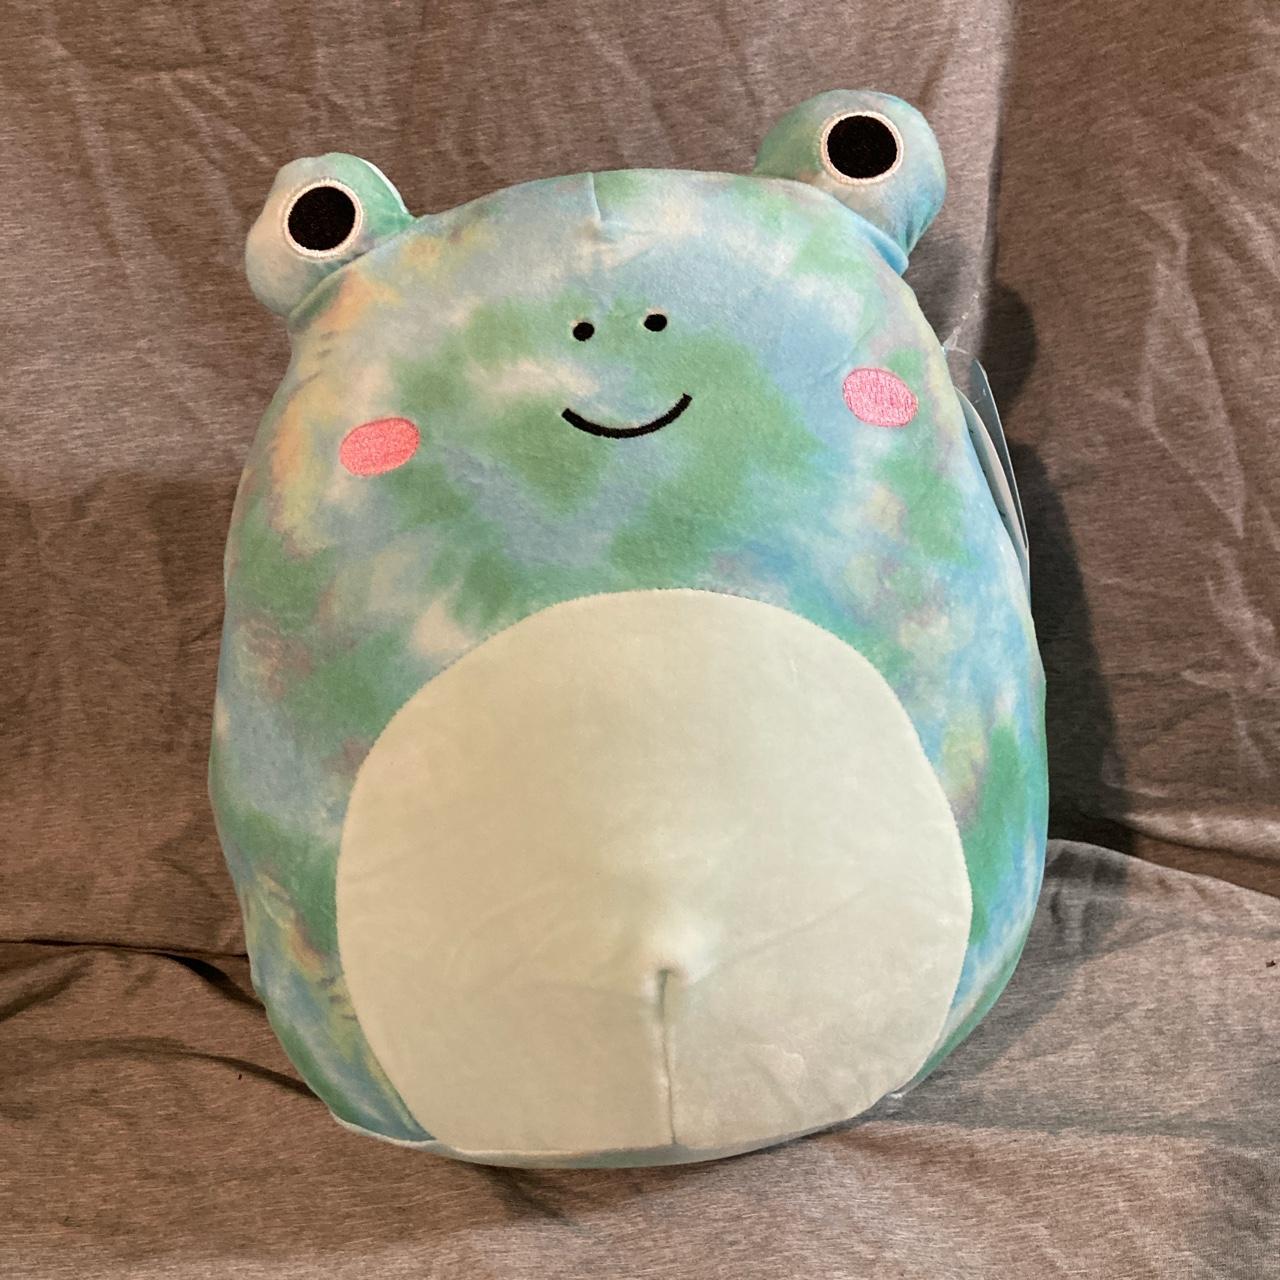 Ferdie 10 inch Squishmallow BNWT , Just used for